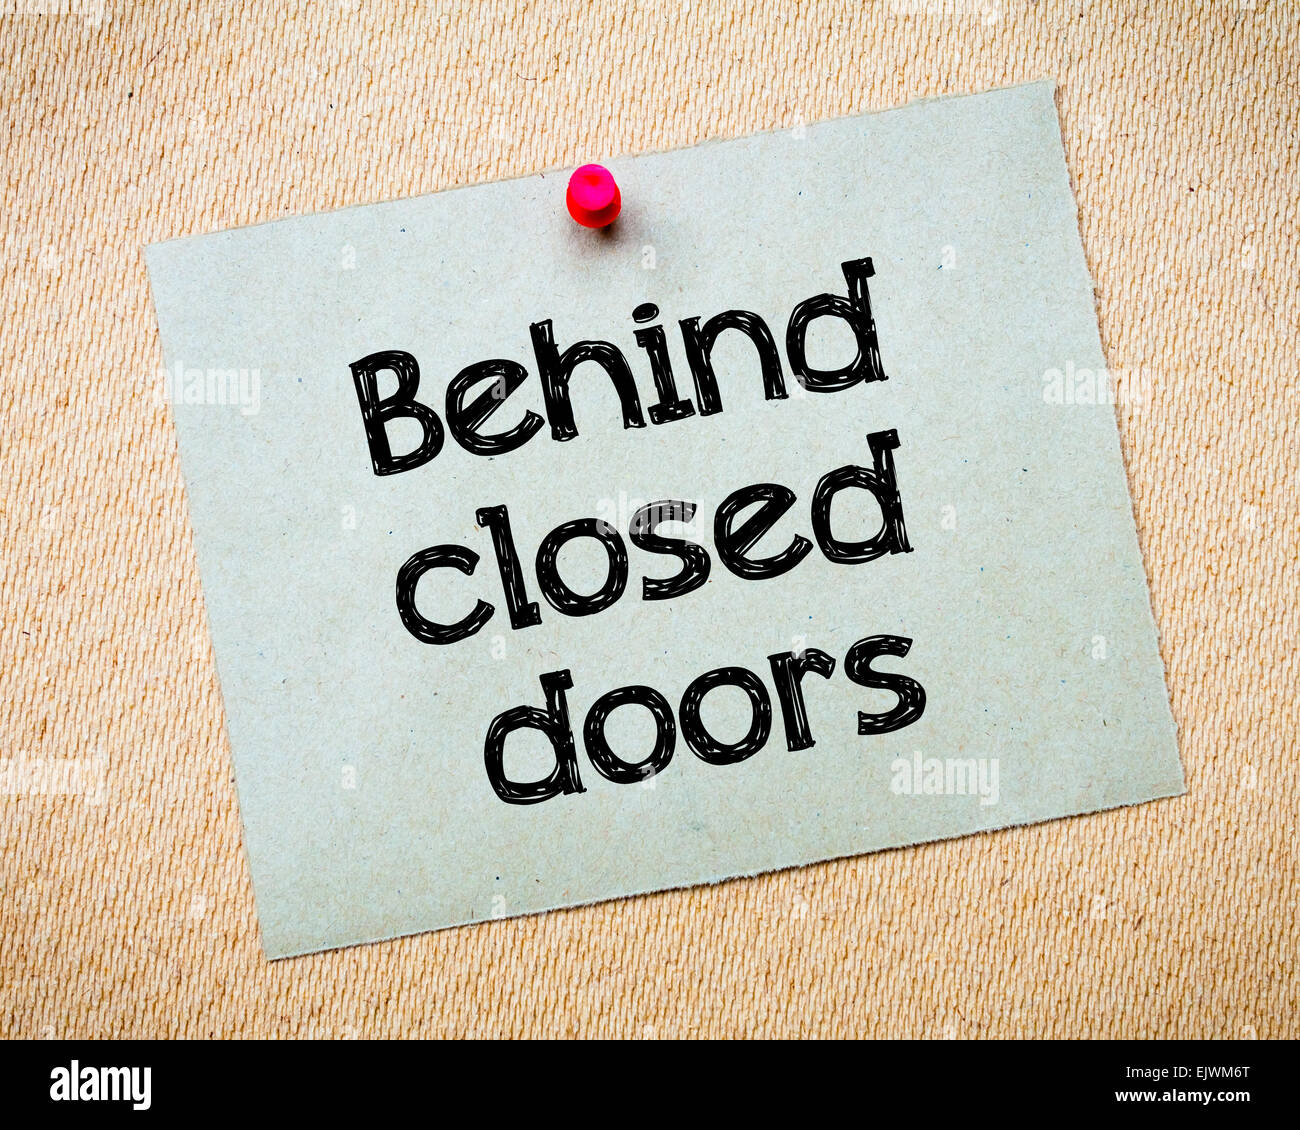 Behind closed doors Message. Recycled paper note pinned on cork board. Concept Image Stock Photo